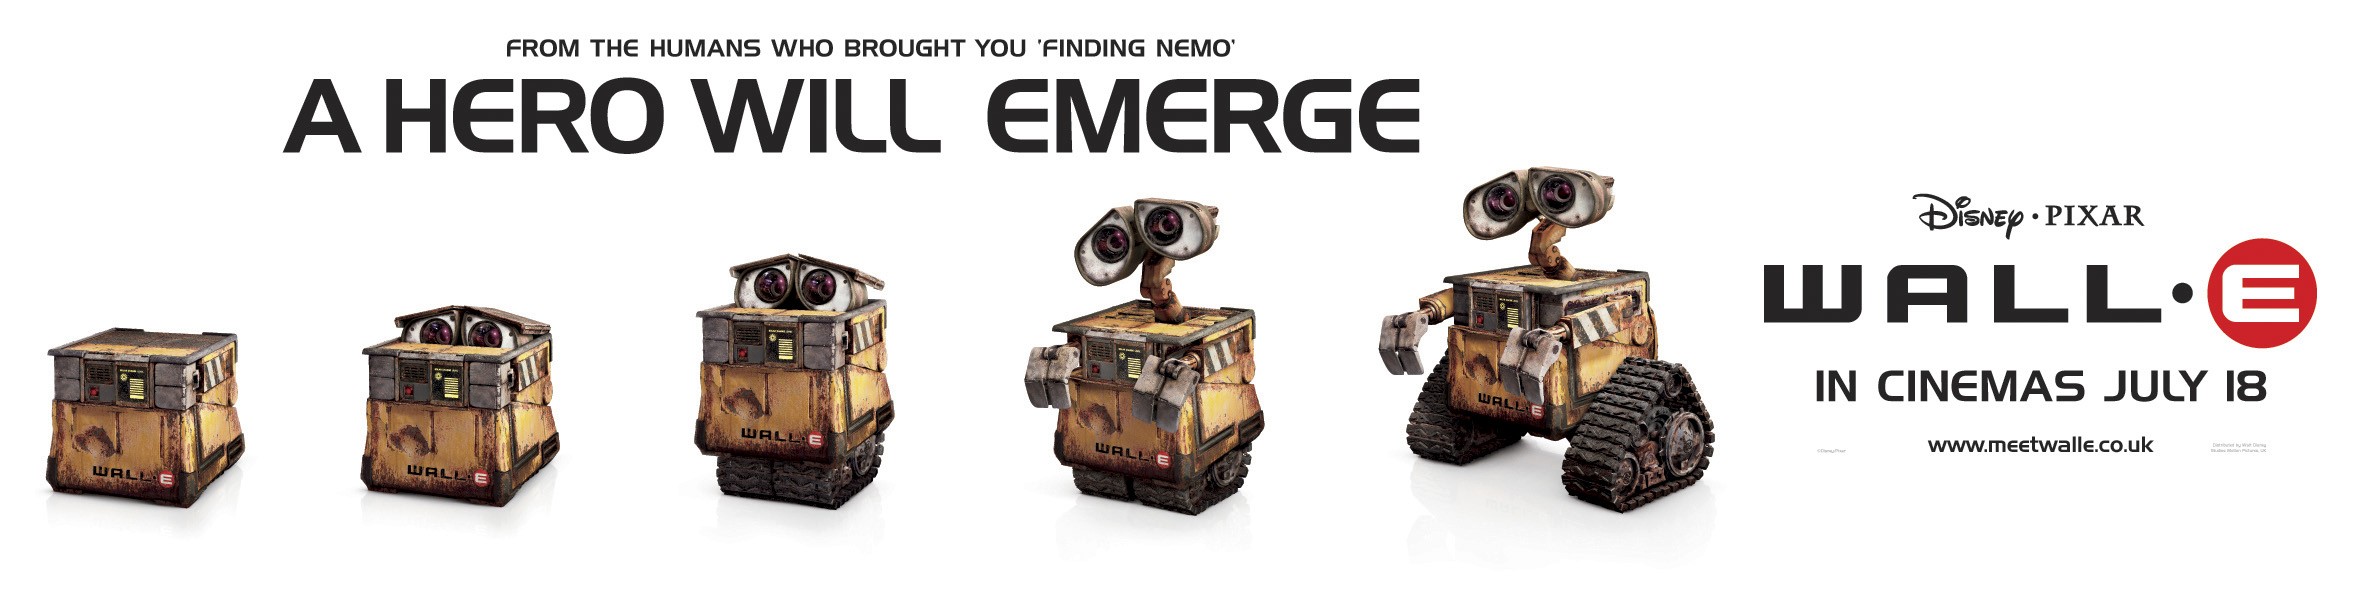 Mega Sized Movie Poster Image for Wall-E (#18 of 18)